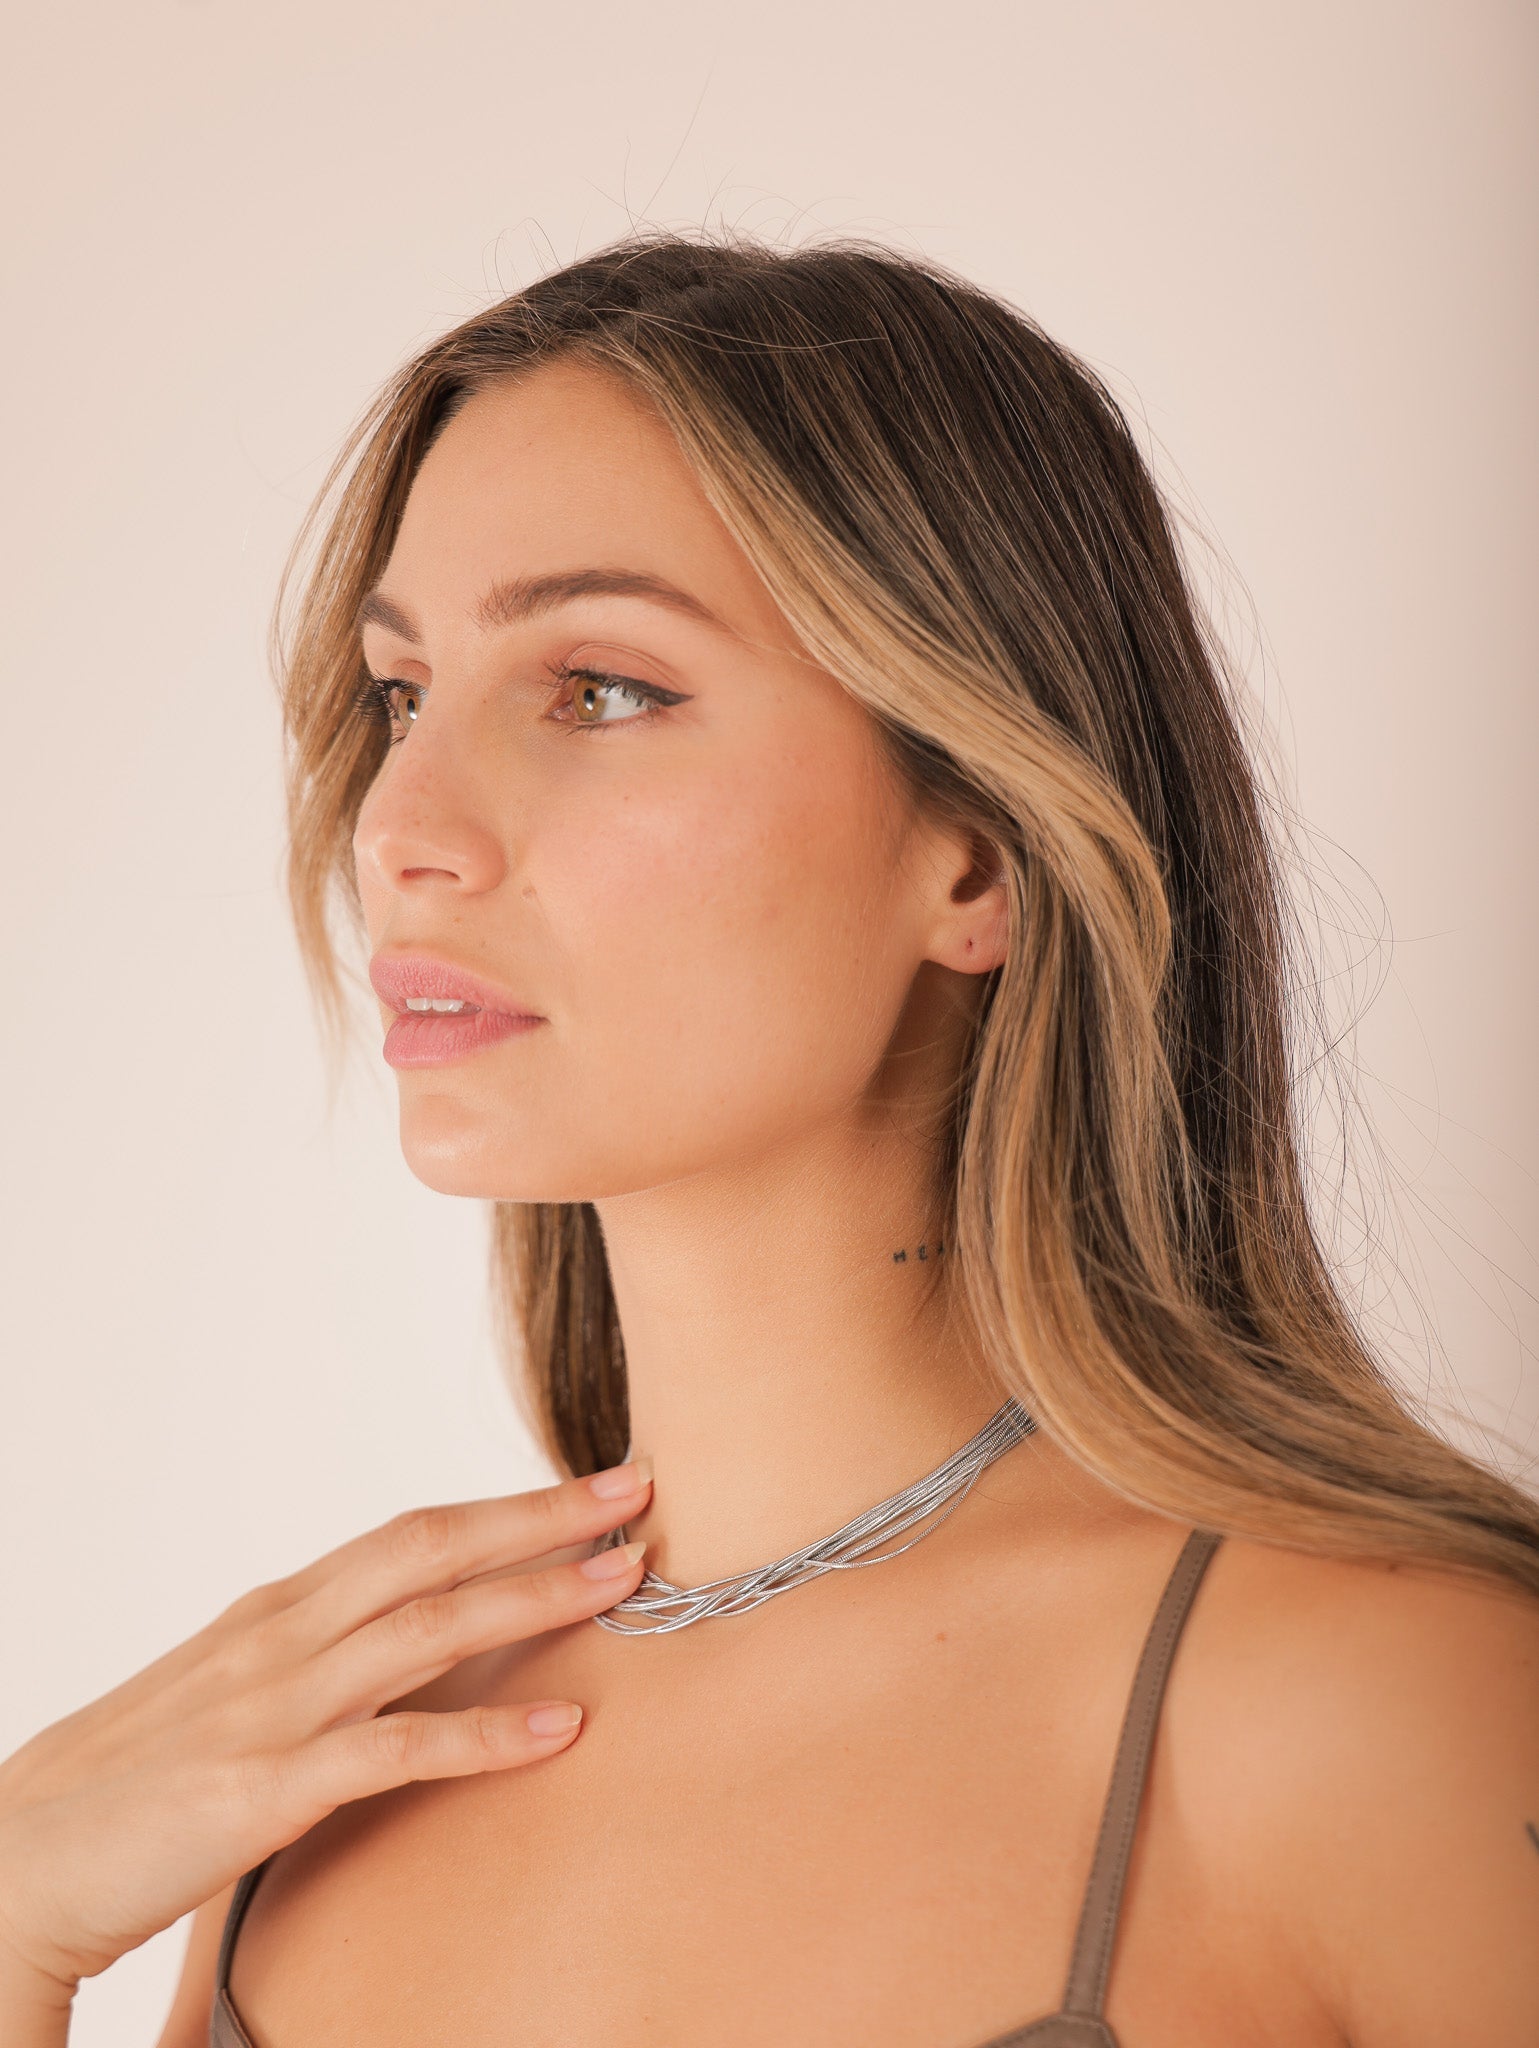 Molly Green - Truce Layered Necklace - Jewelry